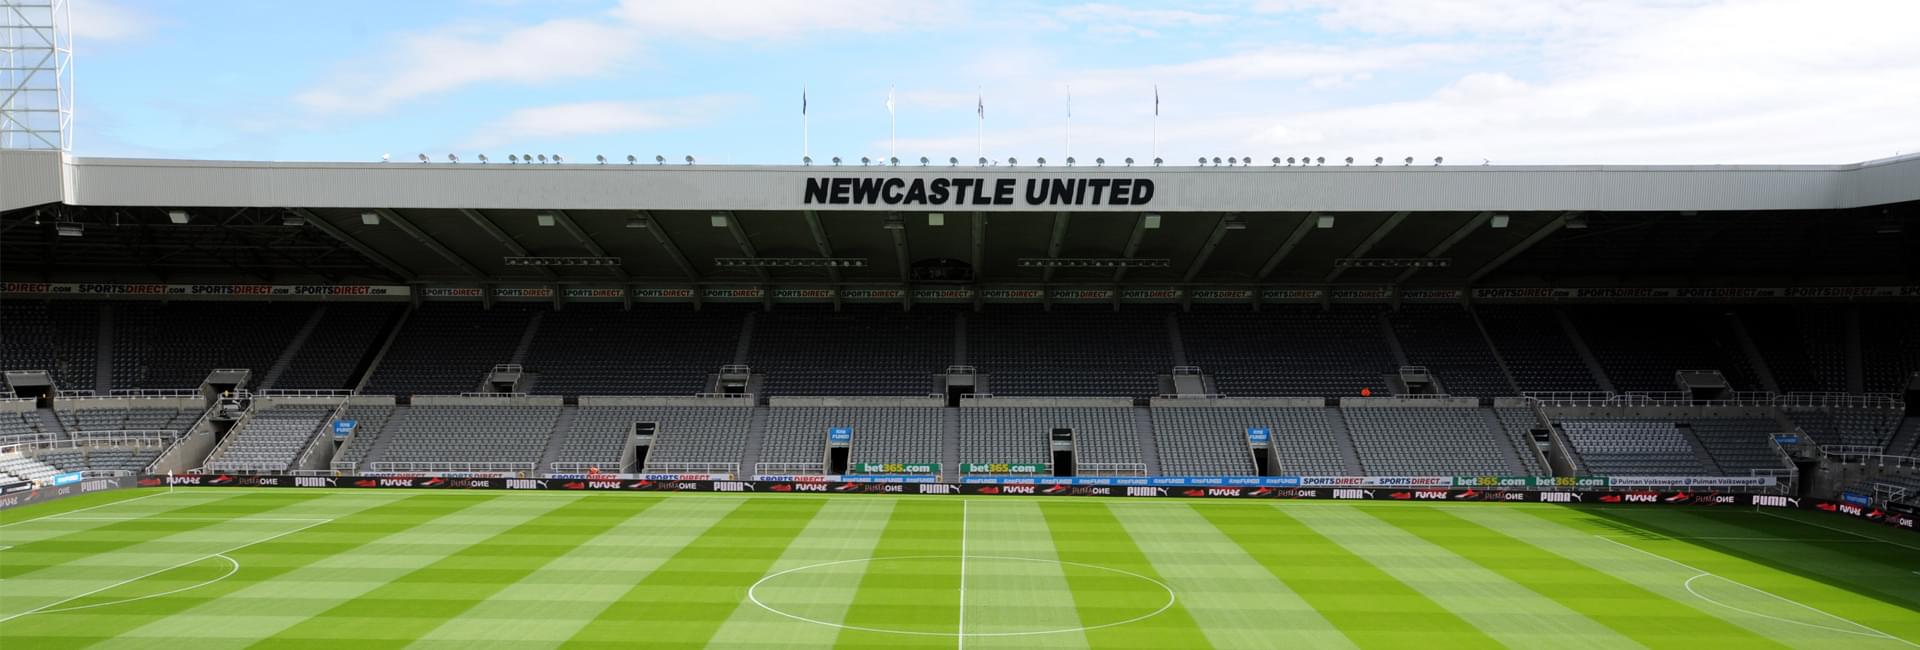 Newcastle United St James Away Fans Guide about st james park stadium hero